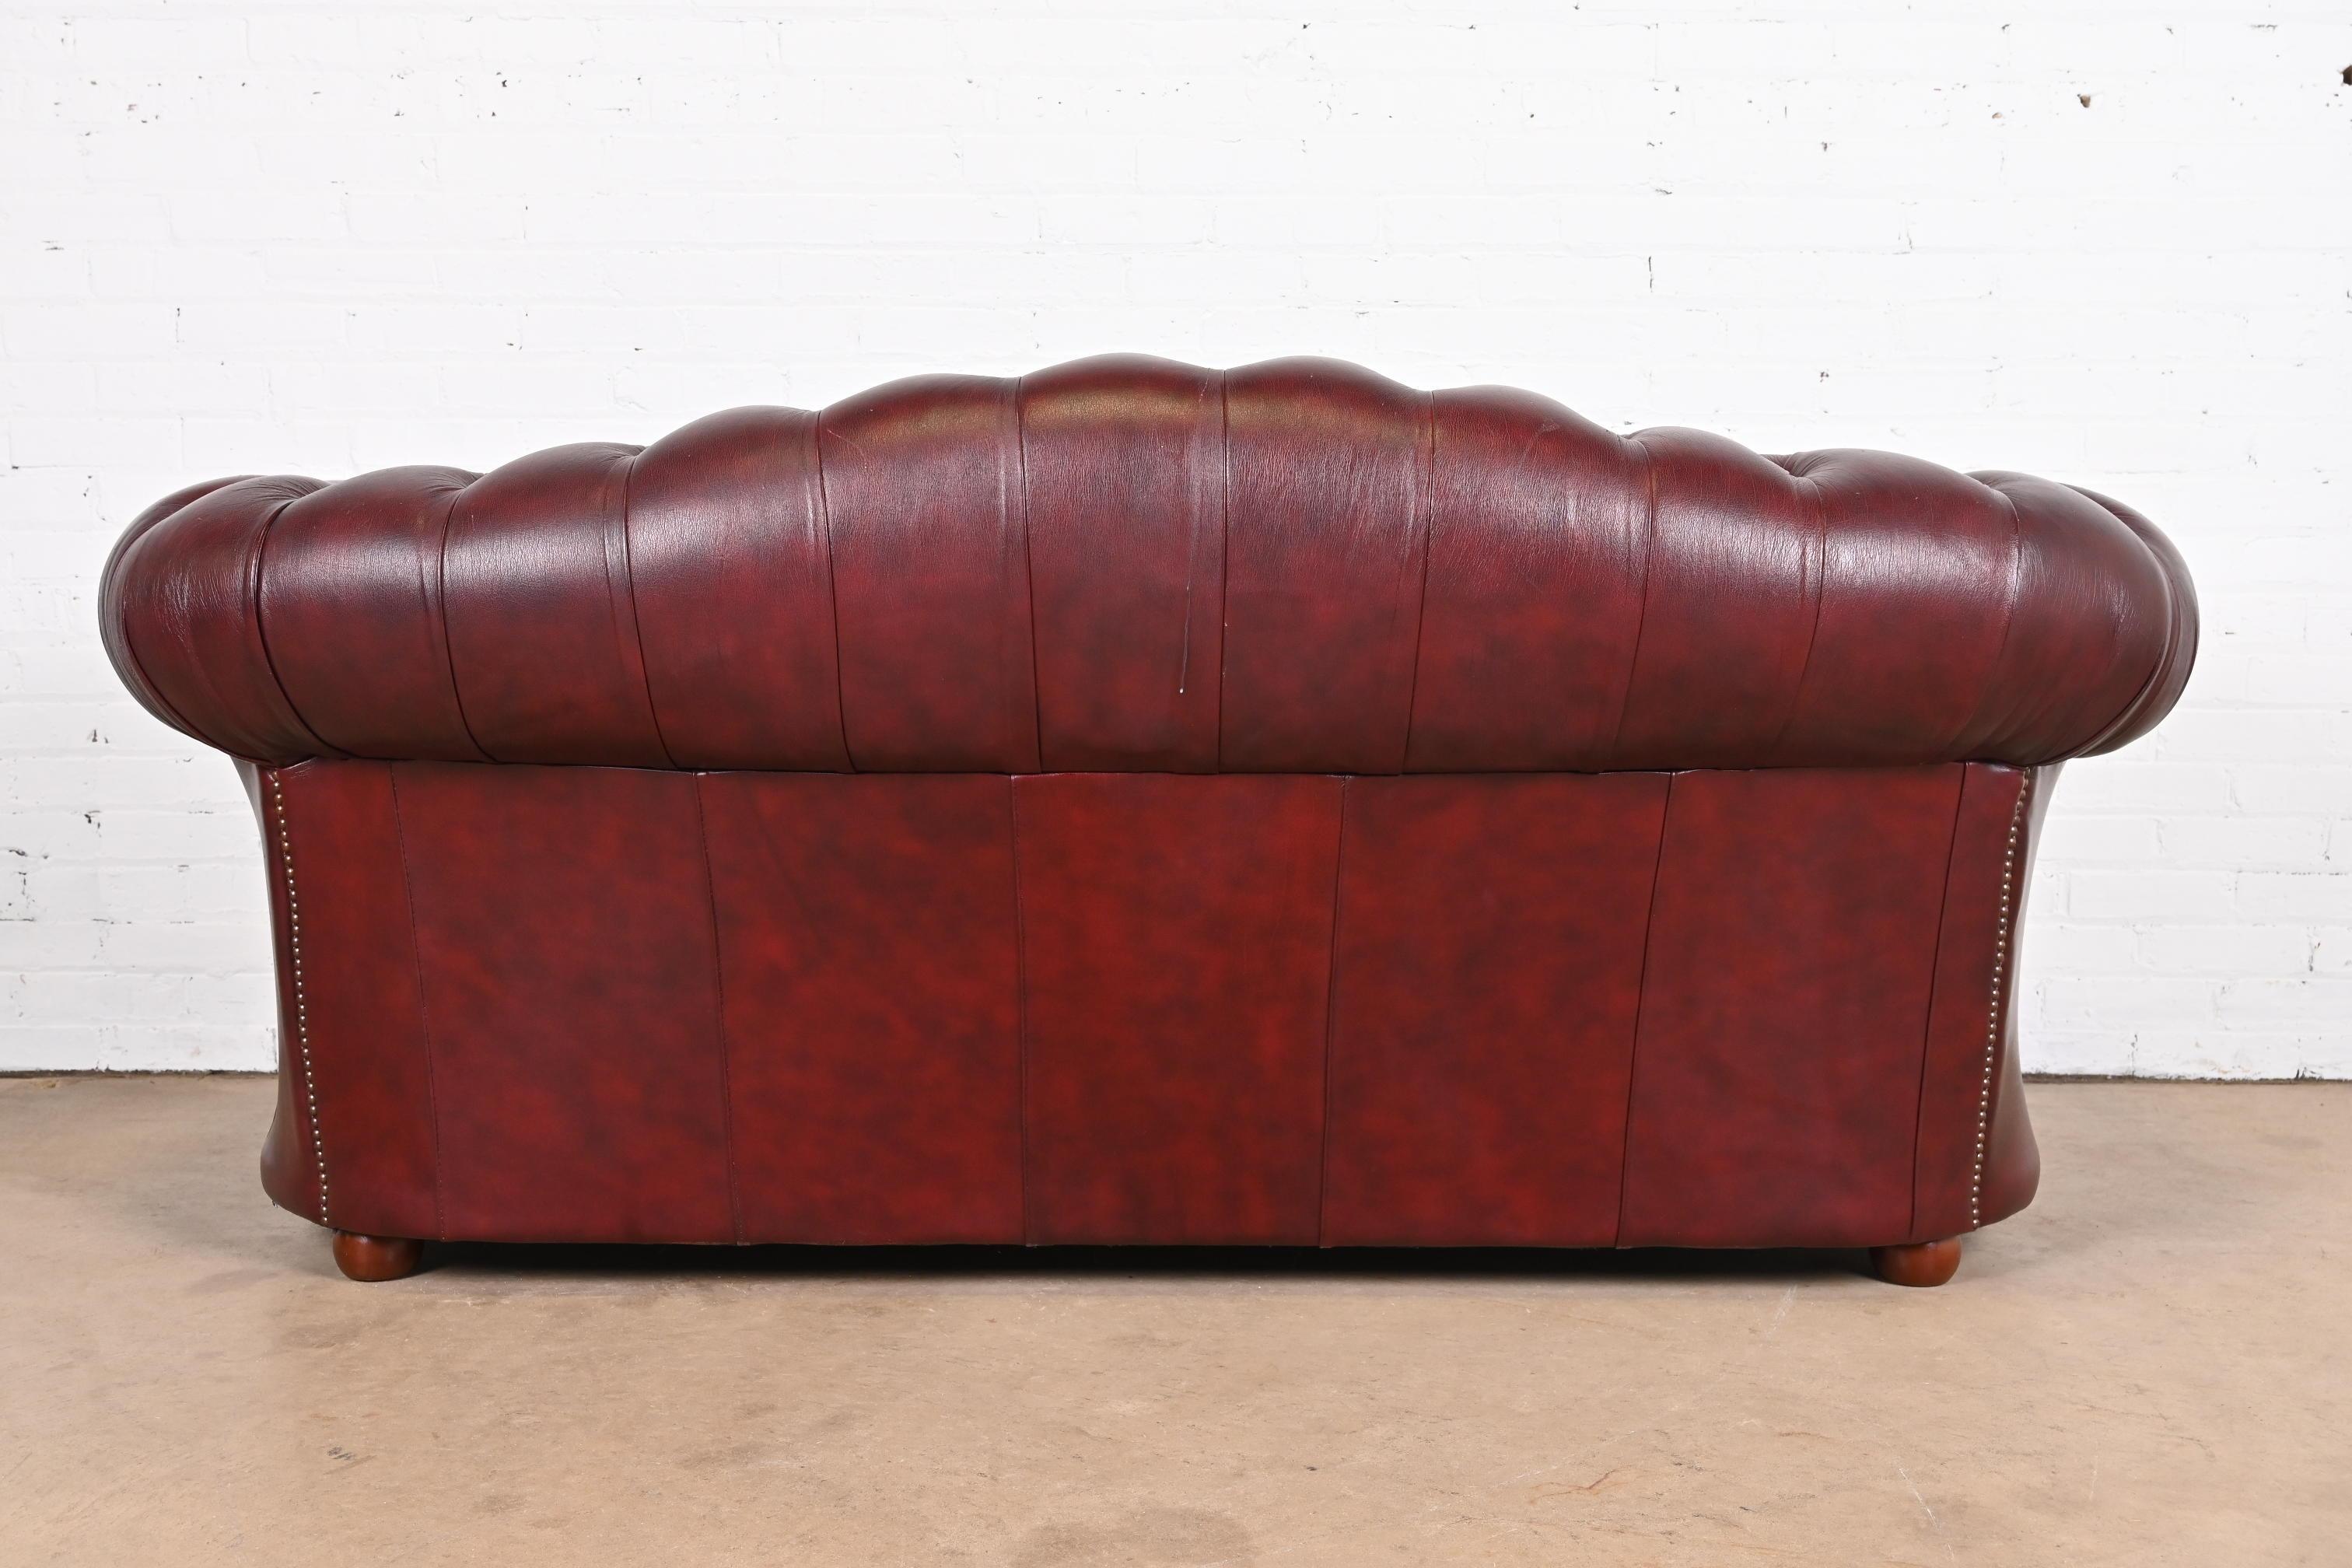 Vintage English Tufted Oxblood Leather Camelback Chesterfield Sofa 7